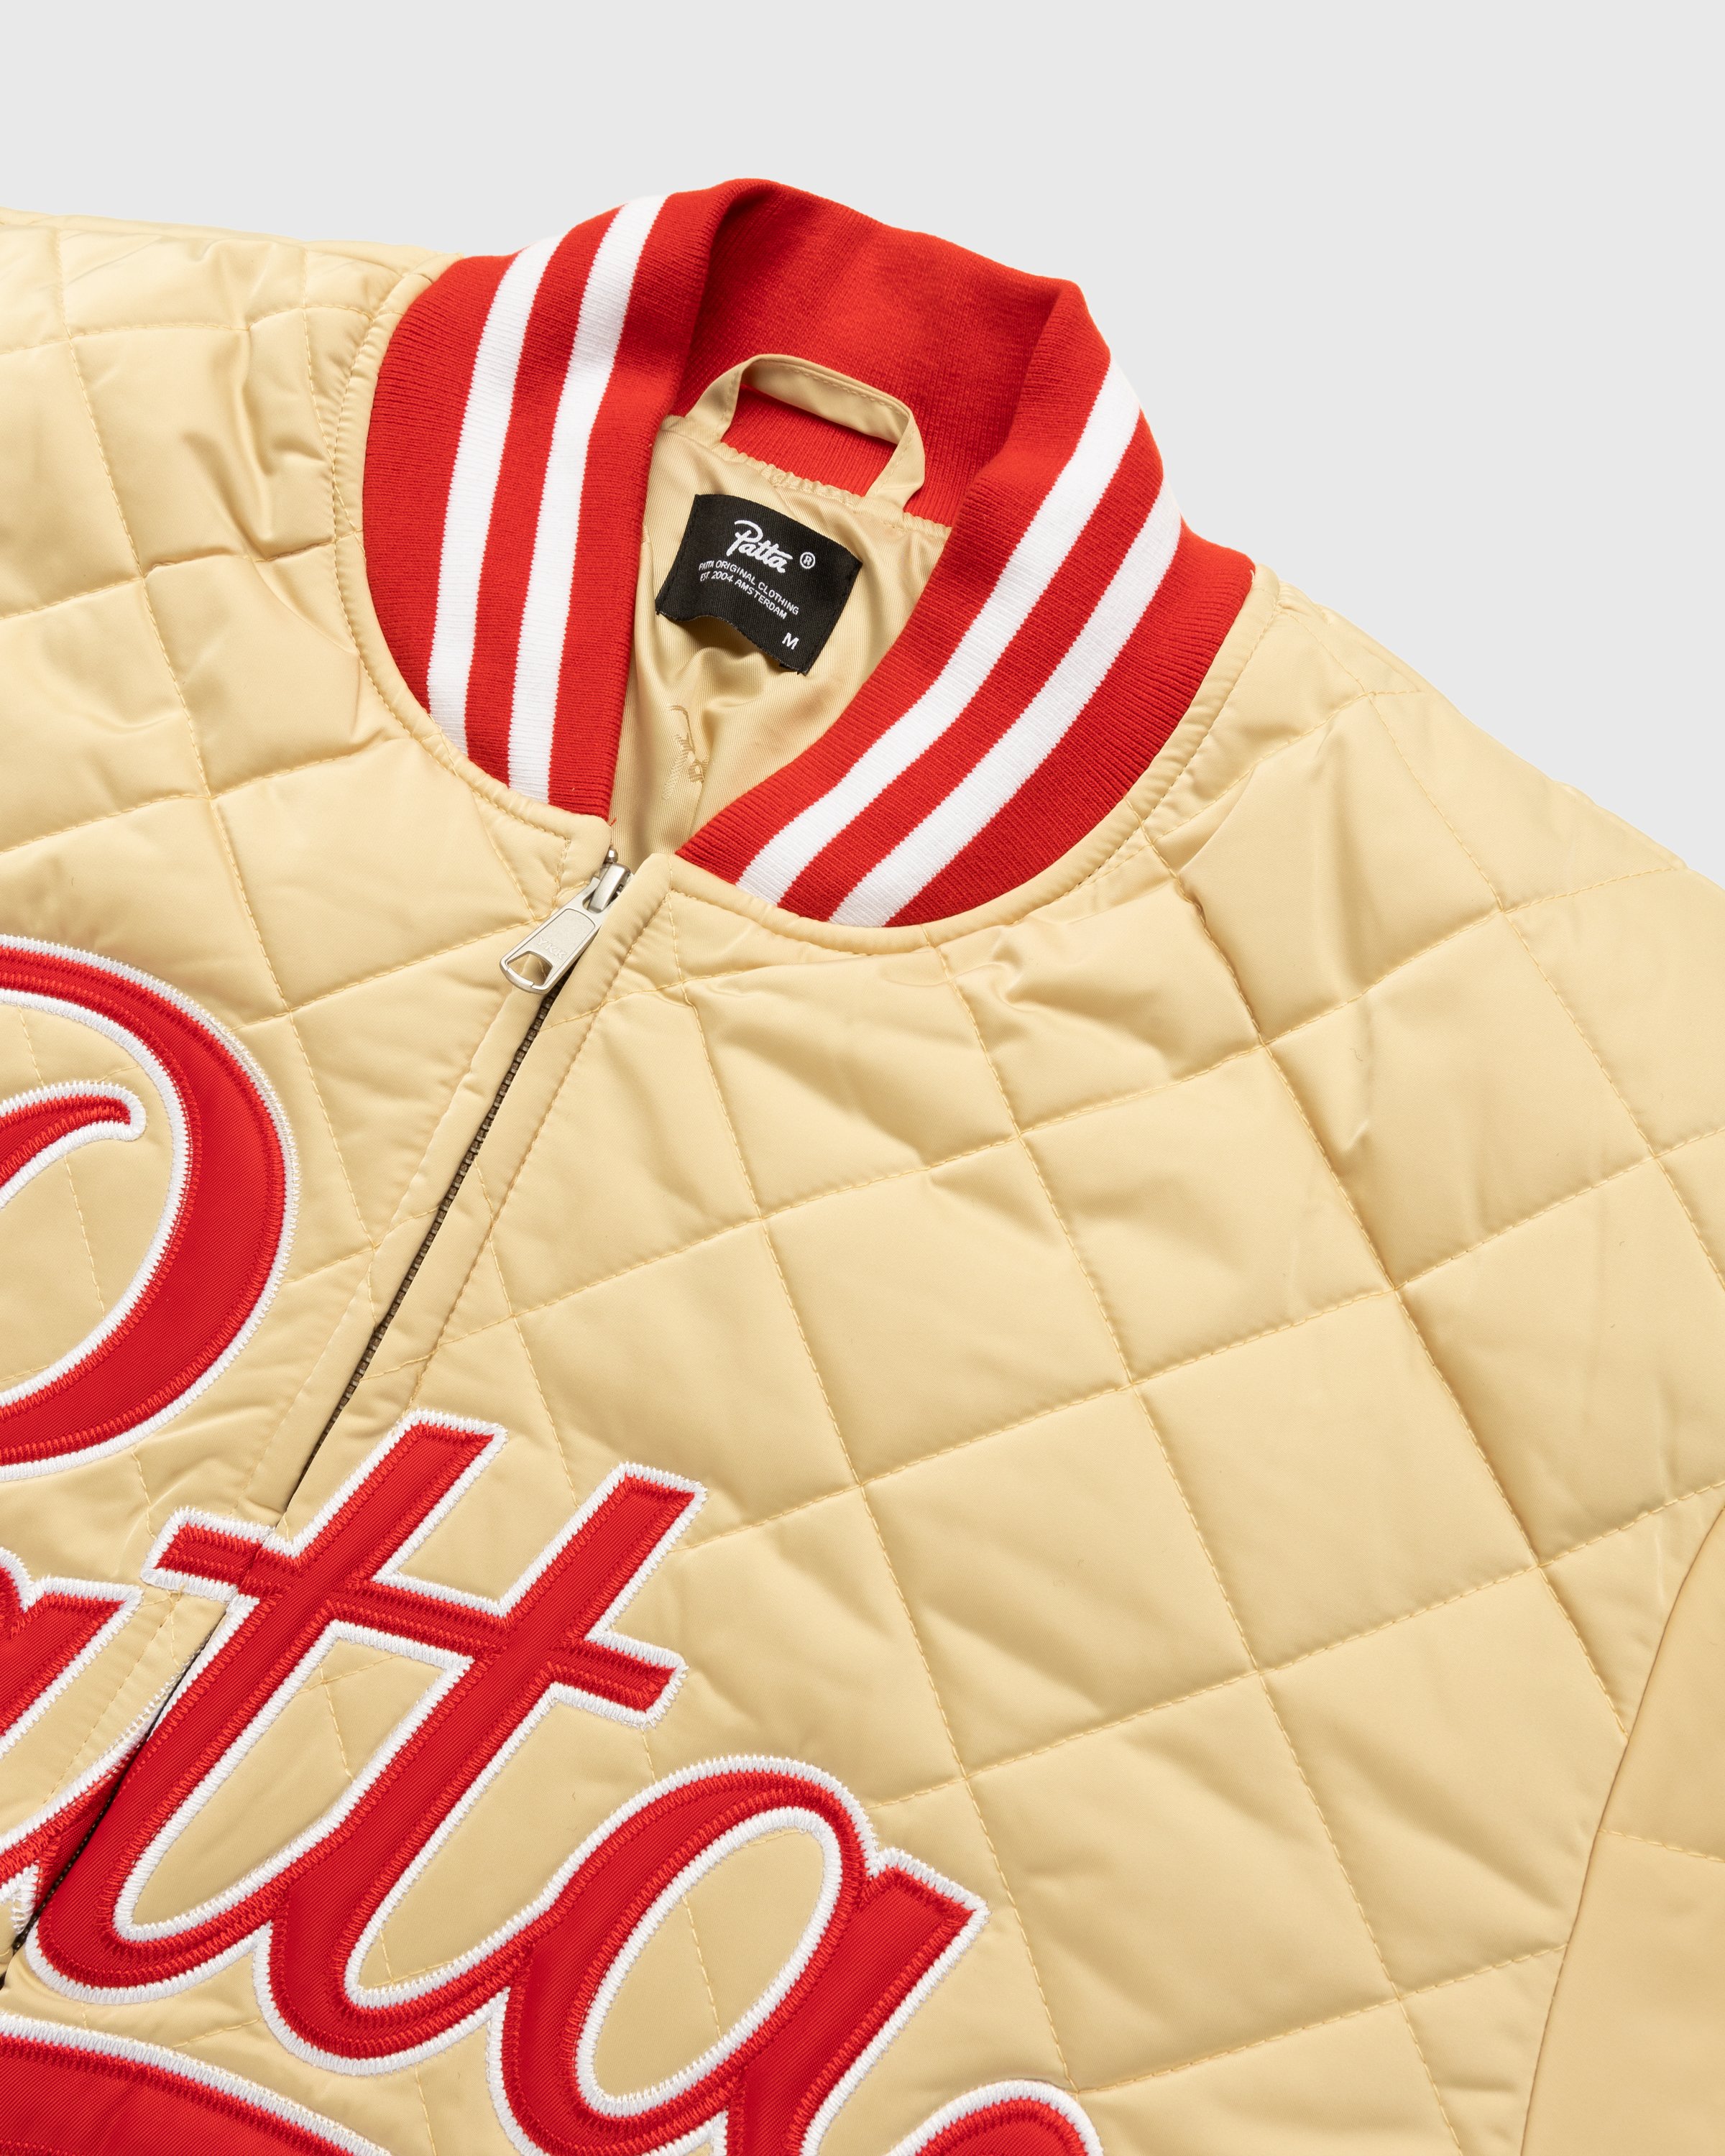 Patta - Diamond Quilted Sports Jacket Mojave Desert - Clothing - Brown - Image 4